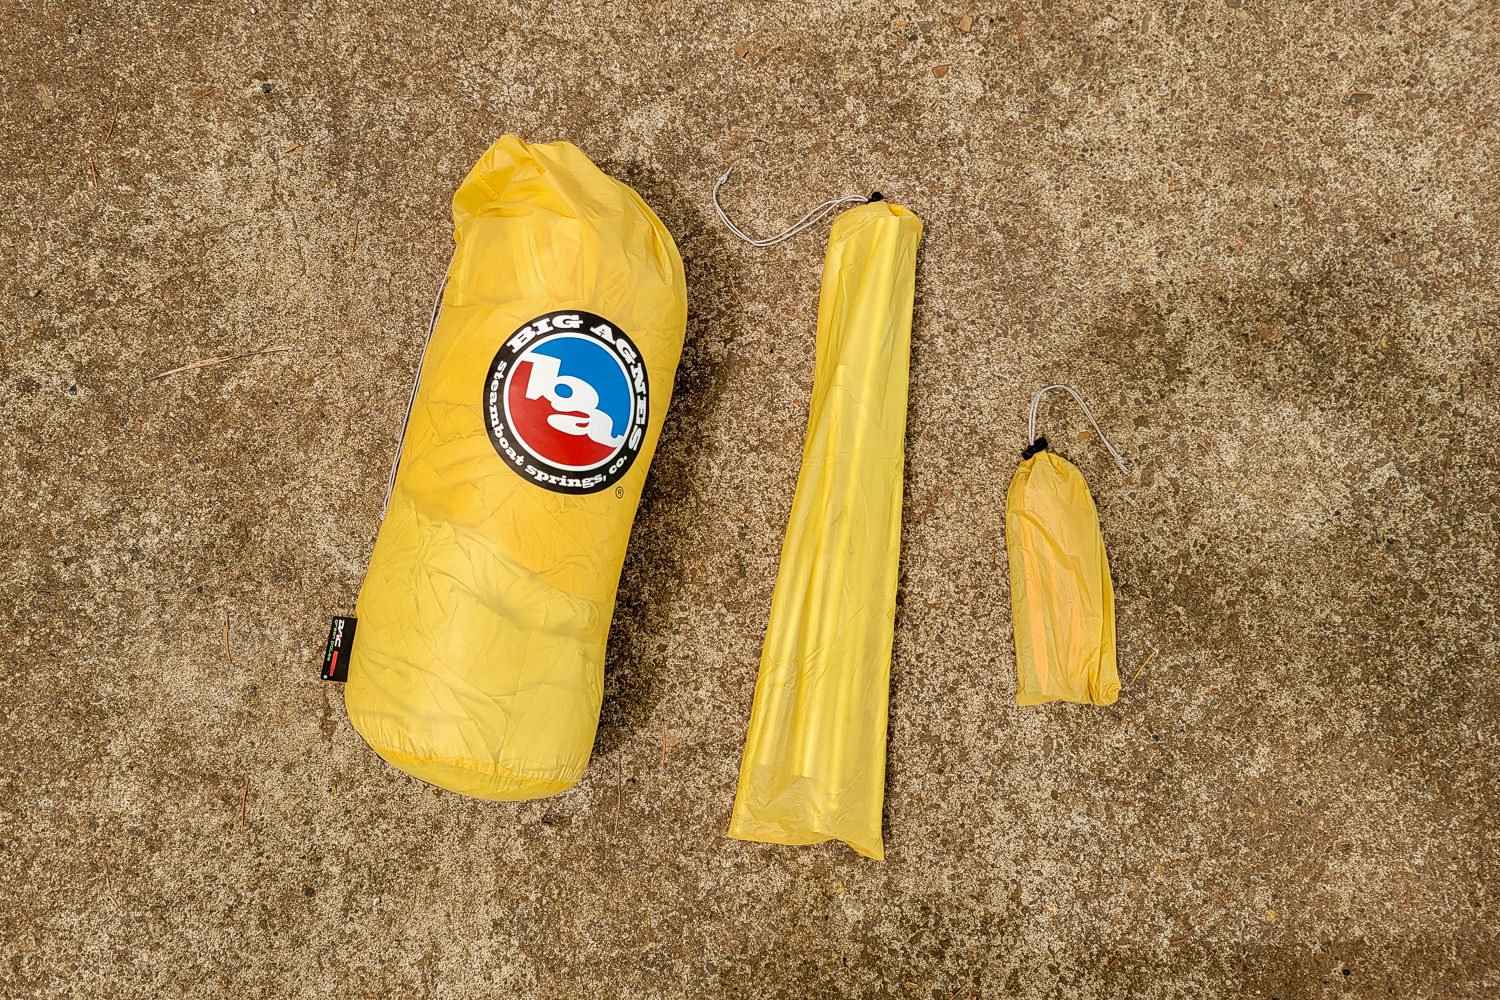 The components of the Big Agnes Tiger Wall UL2 broken down into stuff sacks: tent body and fly, tent poles, and tent stakes